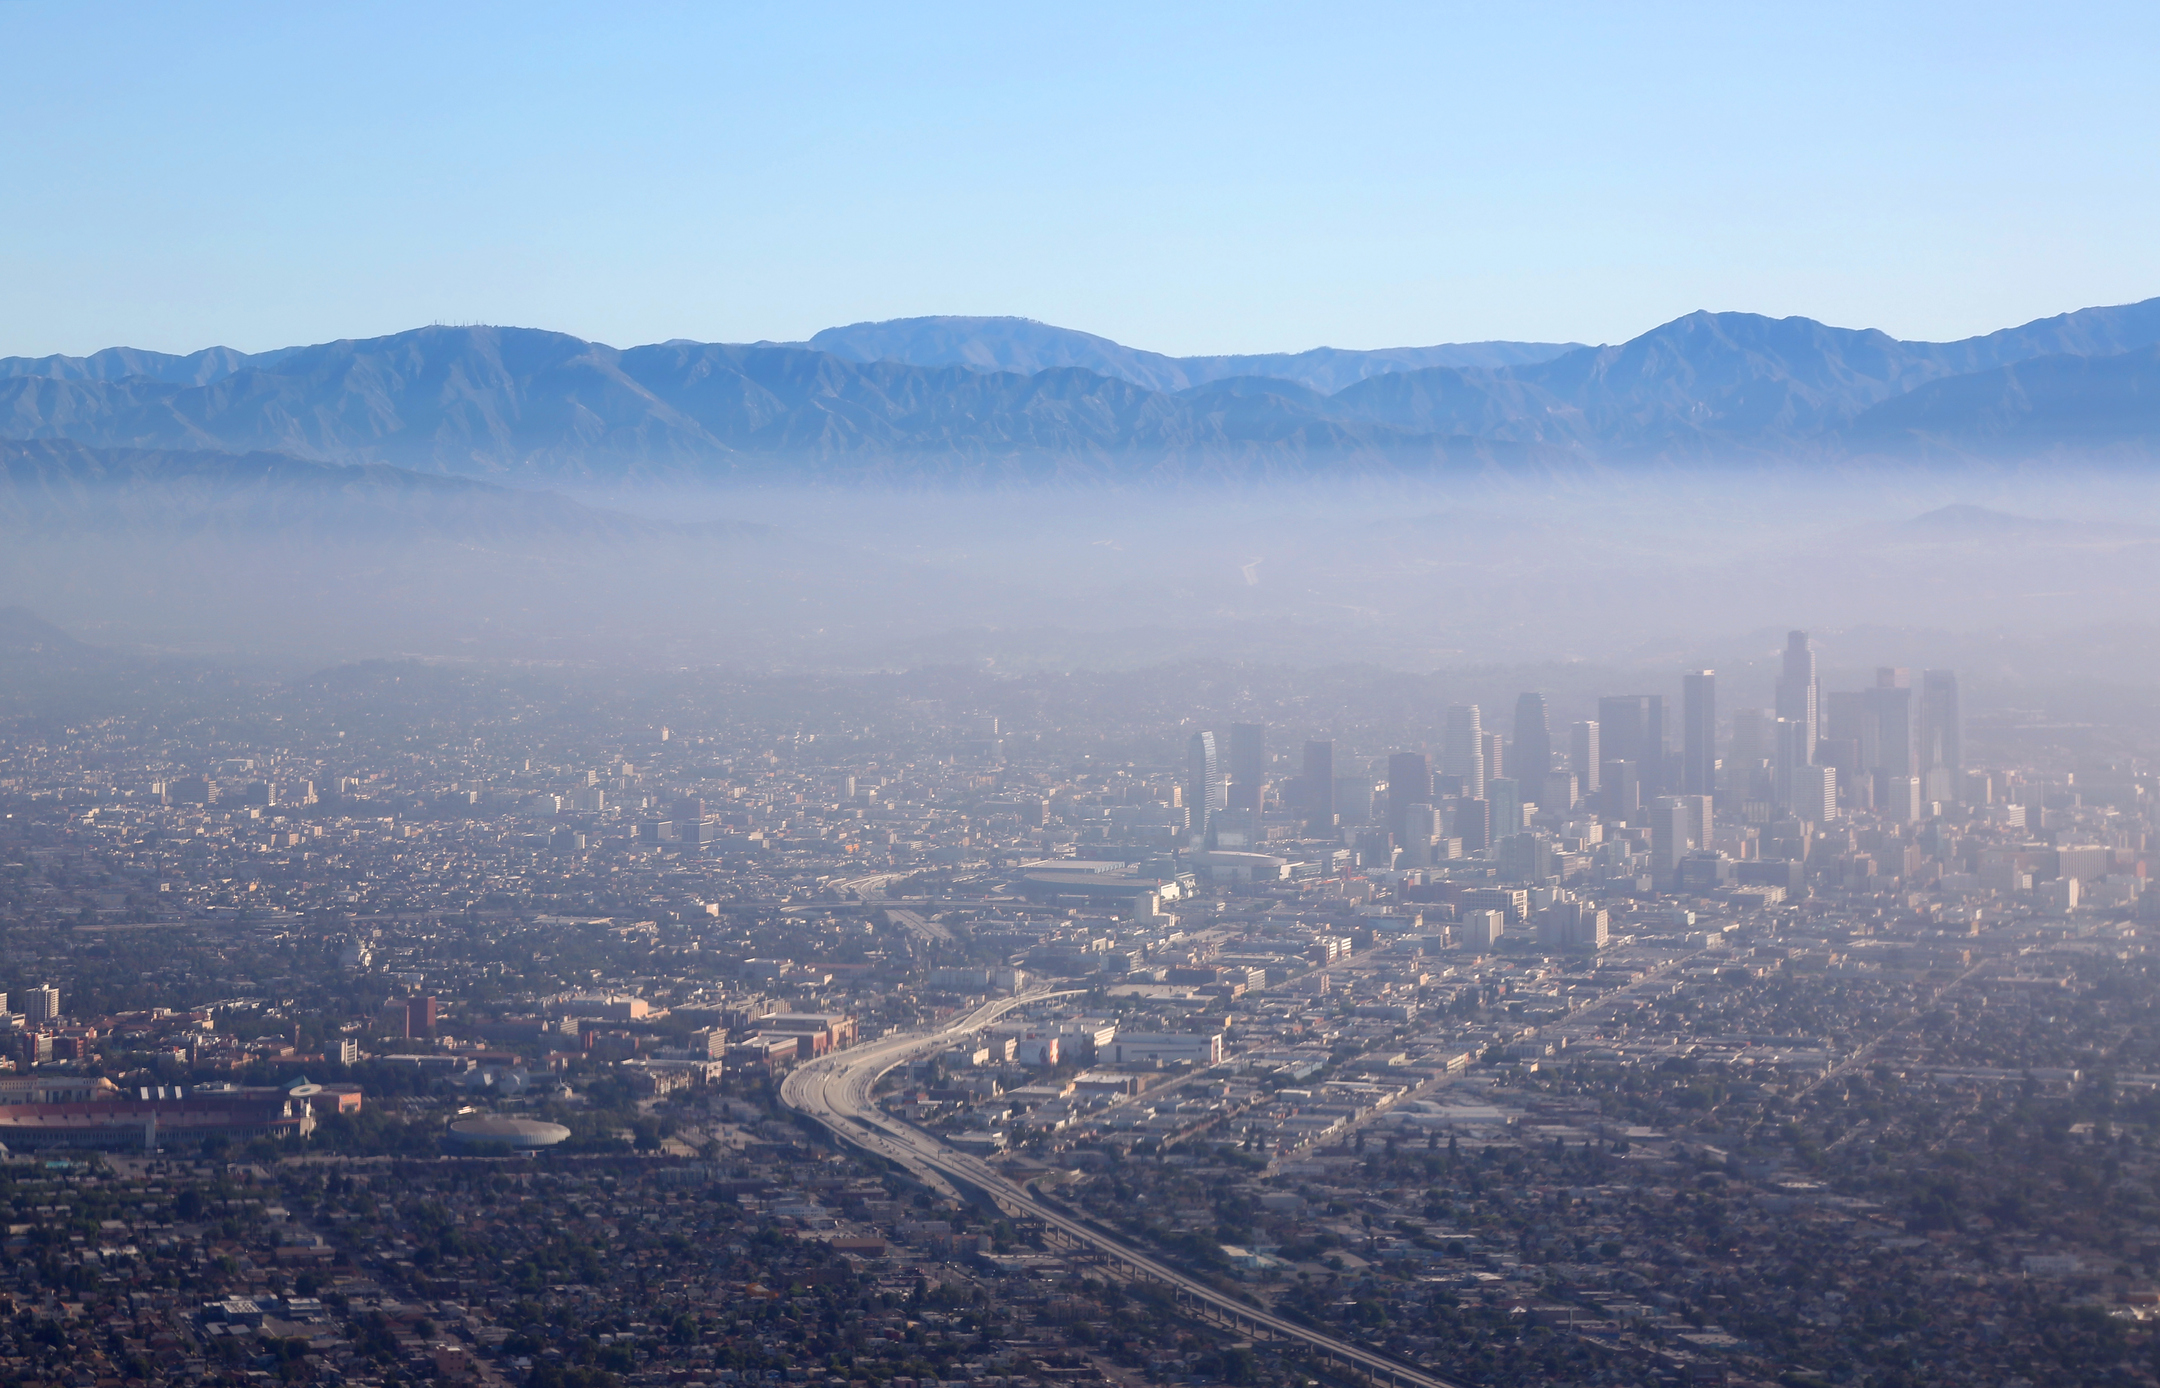 Smog settles over downtown Los Angeles with San Gabriel mountains in background